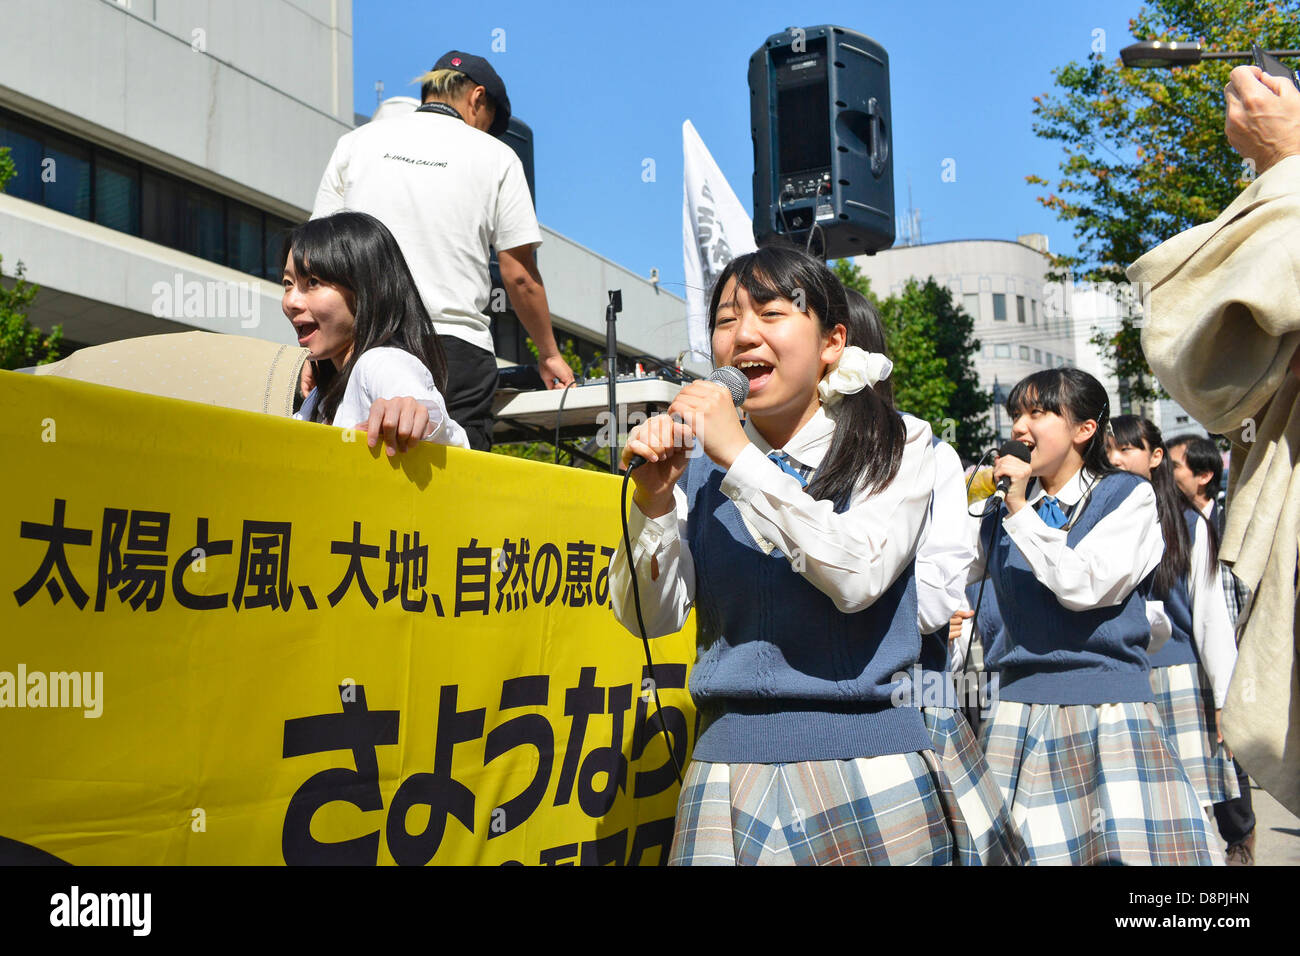 Tokyo, Japan. 2nd June 2013. Members of Seifuku Kojo Iinkai, an idol group, and hundreds of thousands of people marched against nuclear power plants in front of Tokyo Electric Power Company, or TEPCO, Uchisaiwaicho, Chiyoda, Tokyo, Japan on June 2, 2013. According to a demonstration authority, approximately 7,500 people showed up to the event. (Photo by Koichiro Suzuki/AFLO/Alamy Live News) Stock Photo